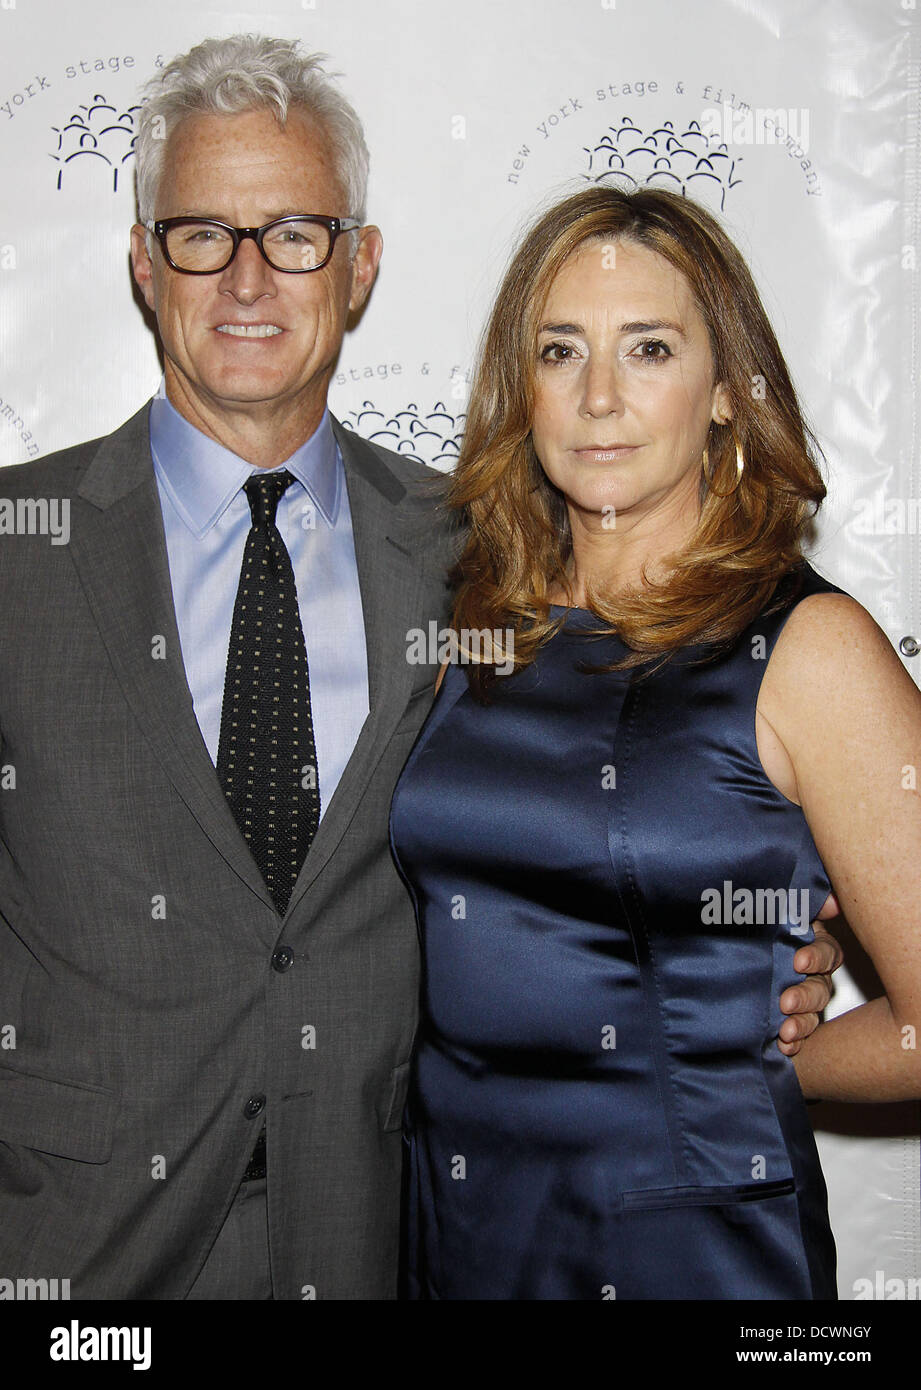 John Slattery and Talia Balsam  The 2011 New York Stage and Film Winter Gala held at The Plaza Hotel - Arrivals.  New York City, USA - 04.12.11 Stock Photo